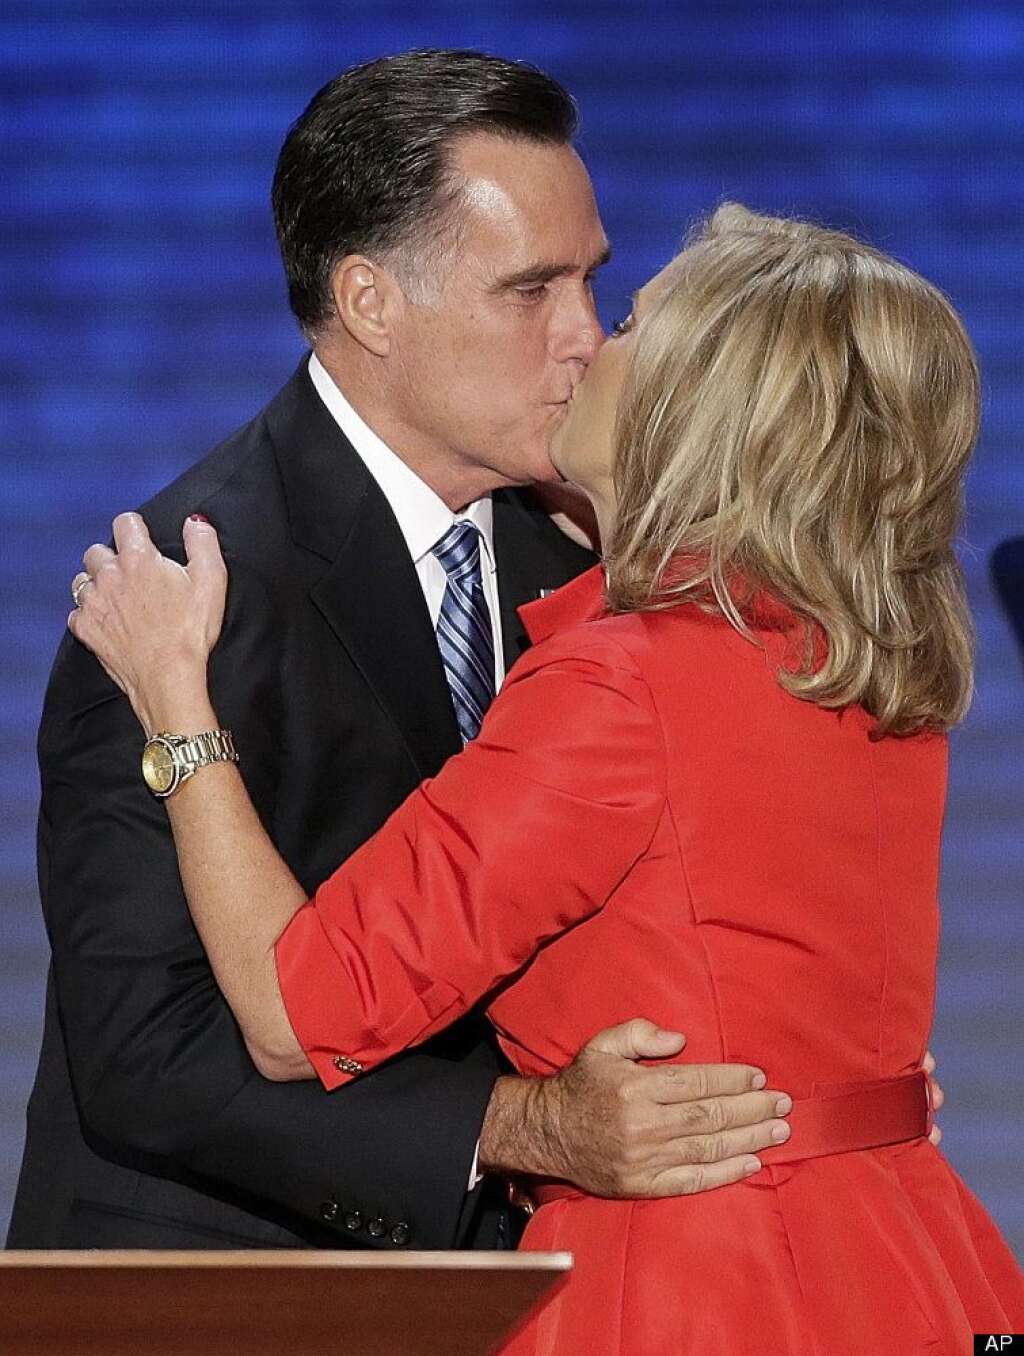 Mitt Romney, Ann Romney - Ann Romney is kissed by her husband Republican presidential nominee Mitt Romney during the Republican National Convention in Tampa, Fla. on Tuesday, Aug. 28, 2012. (AP Photo/J. Scott Applwhite)